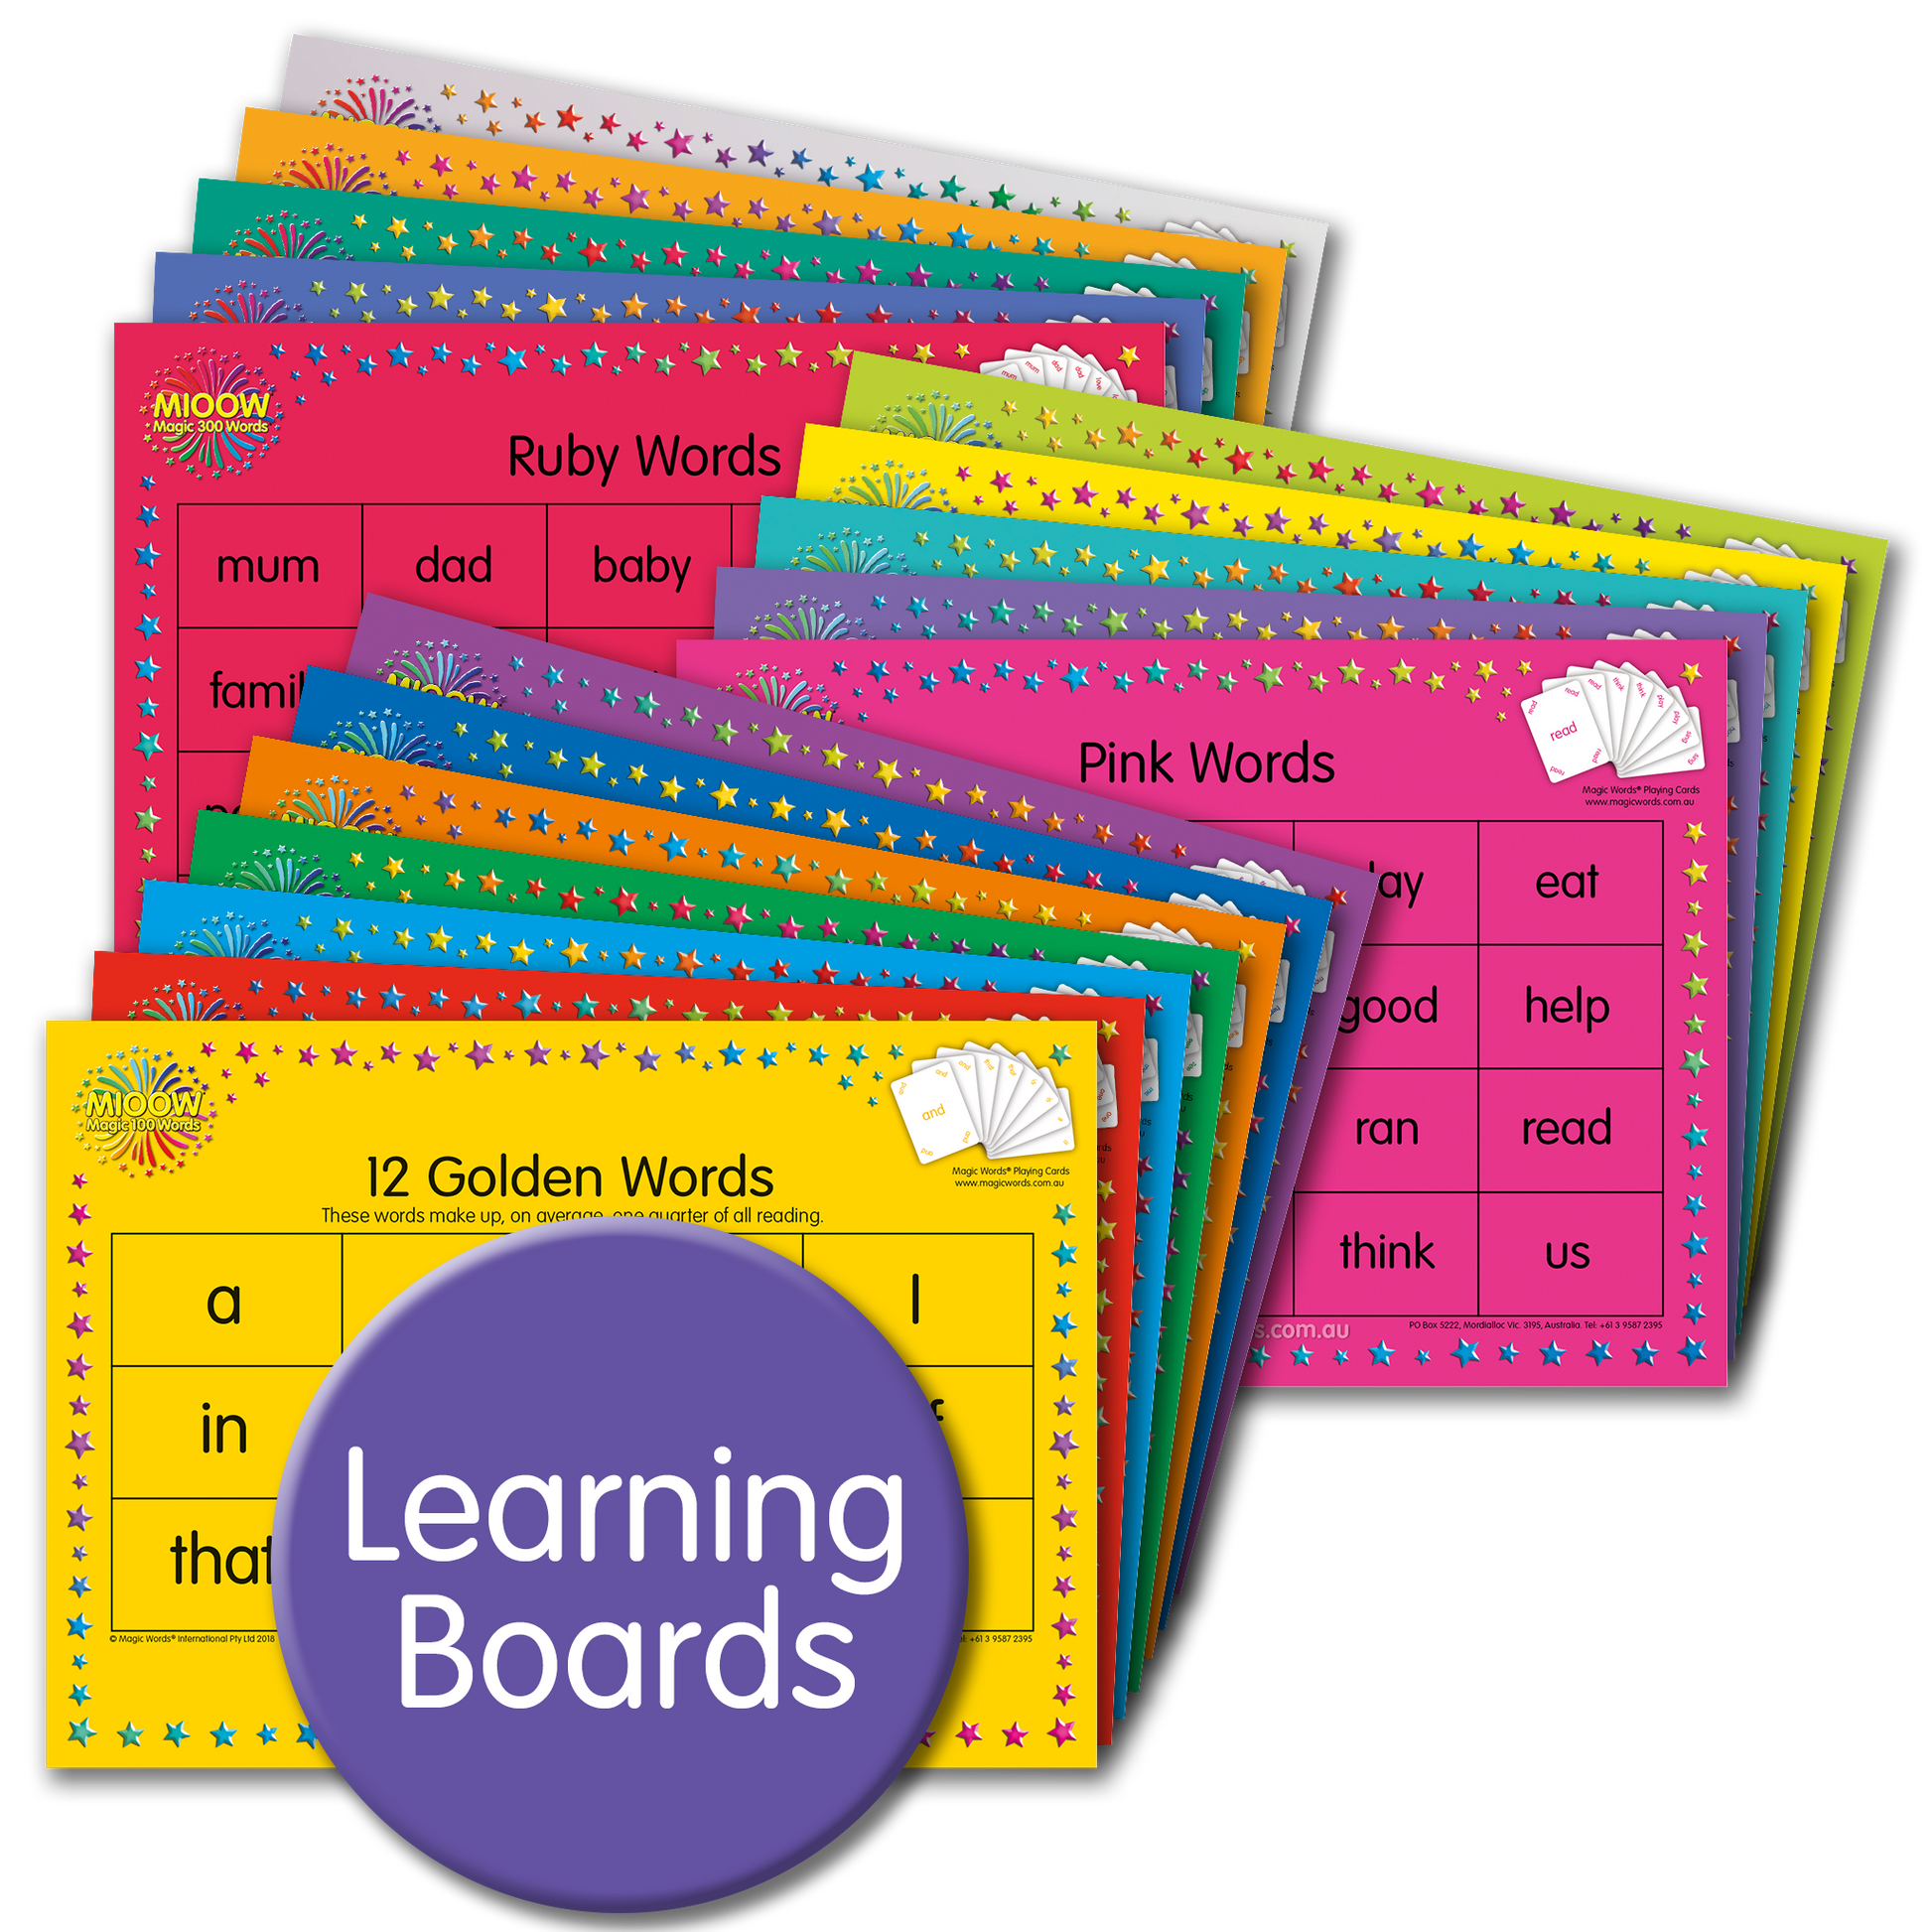 Magic Words sight words Learning Boards for learning to read the most frequently used words in reading. Full sey of learning boards with all 300 Magic Words sight words.